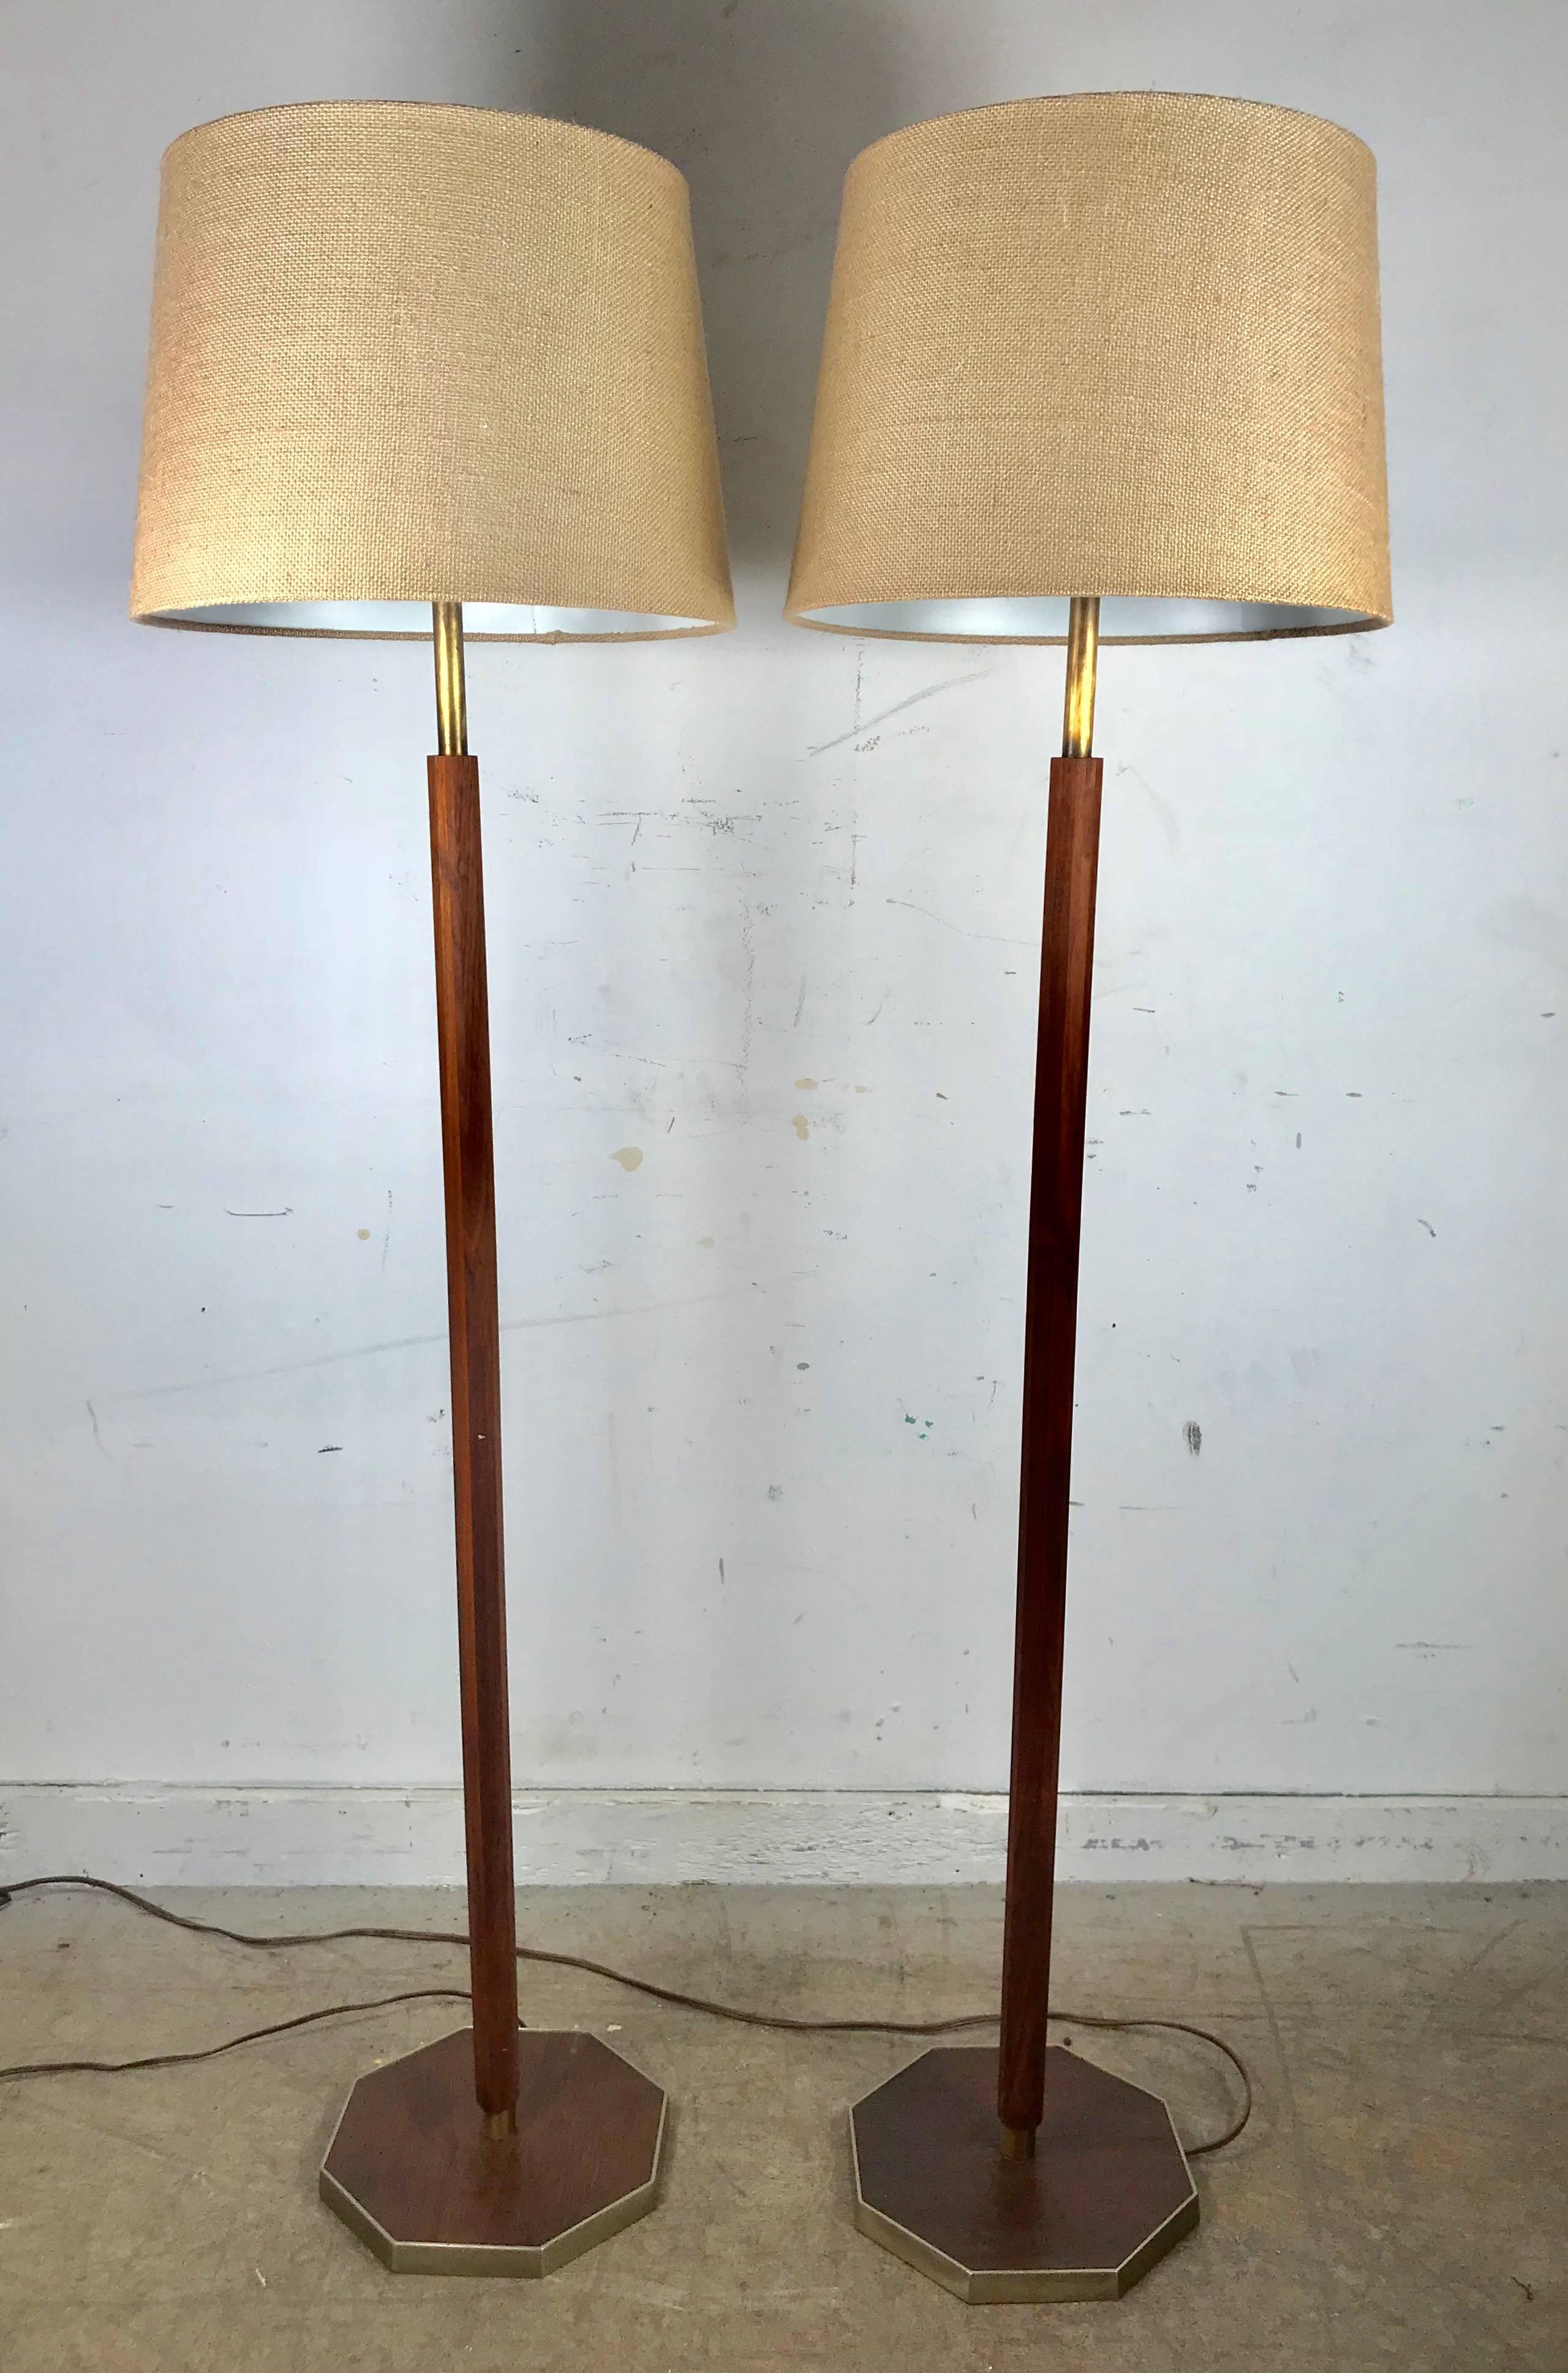 Matched Pair of Rosewood and Aluminium Modernist Floor Lamps 1